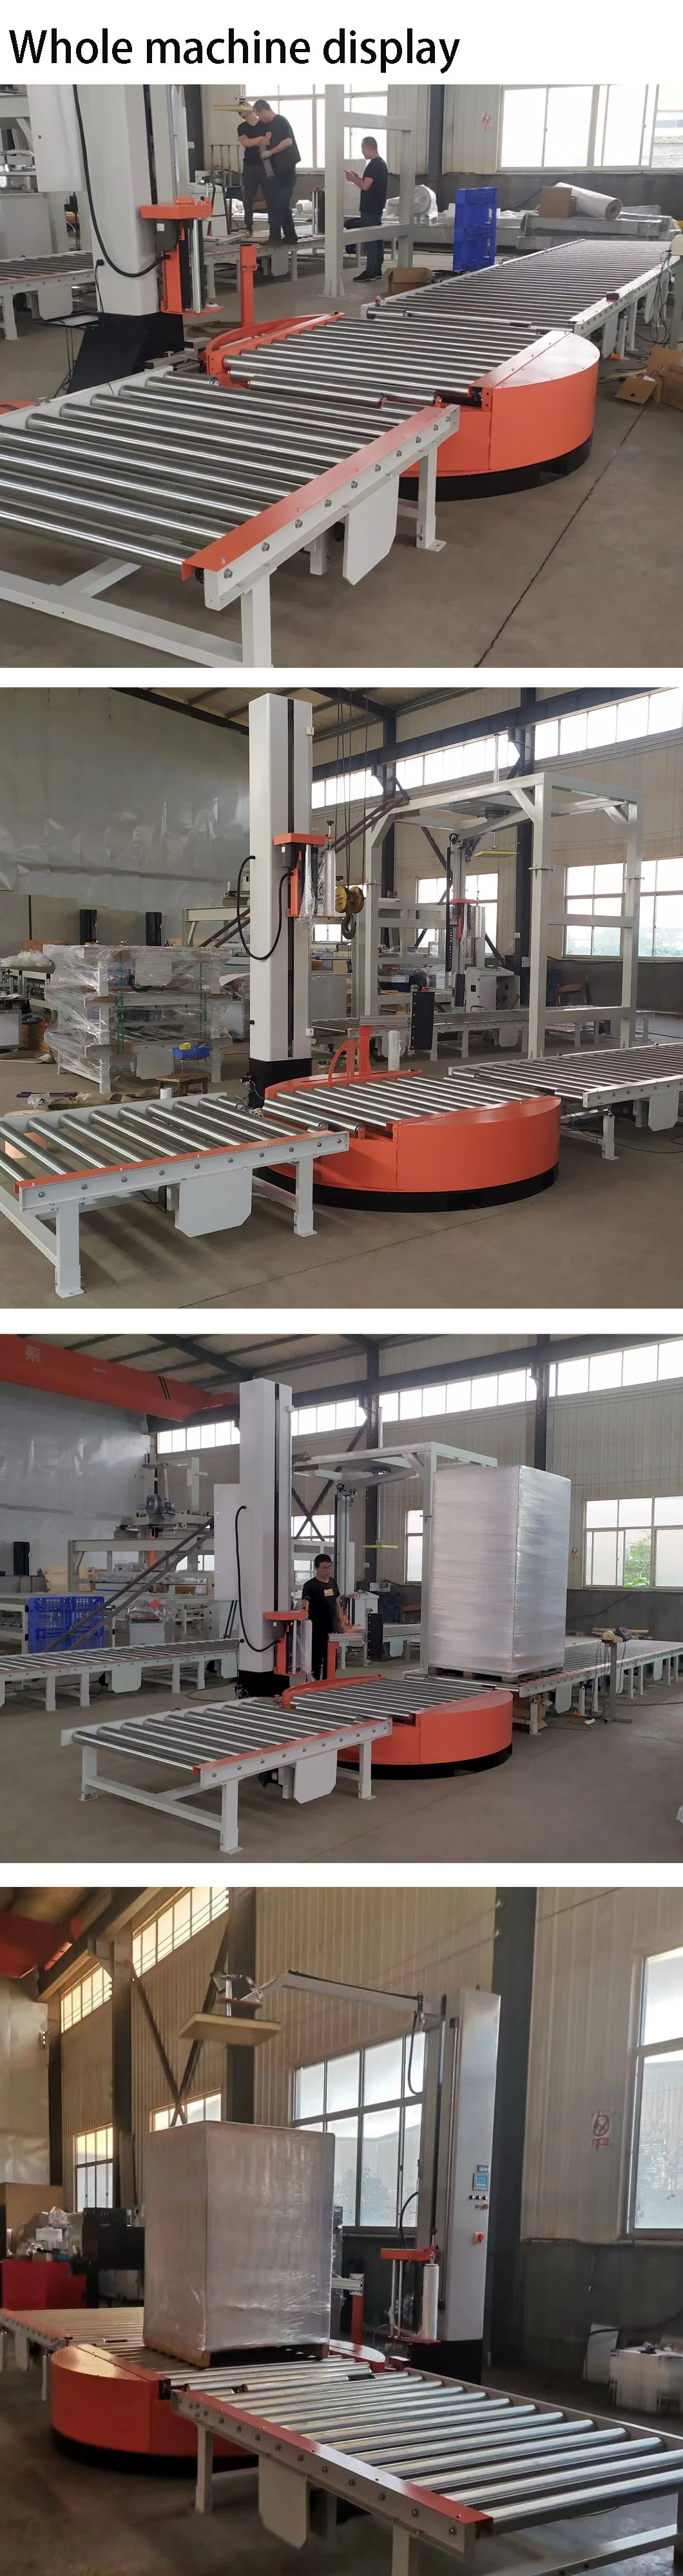 Full-Automatic Pallet Wrapping Equipment with Conveying System for Pallet/Skid